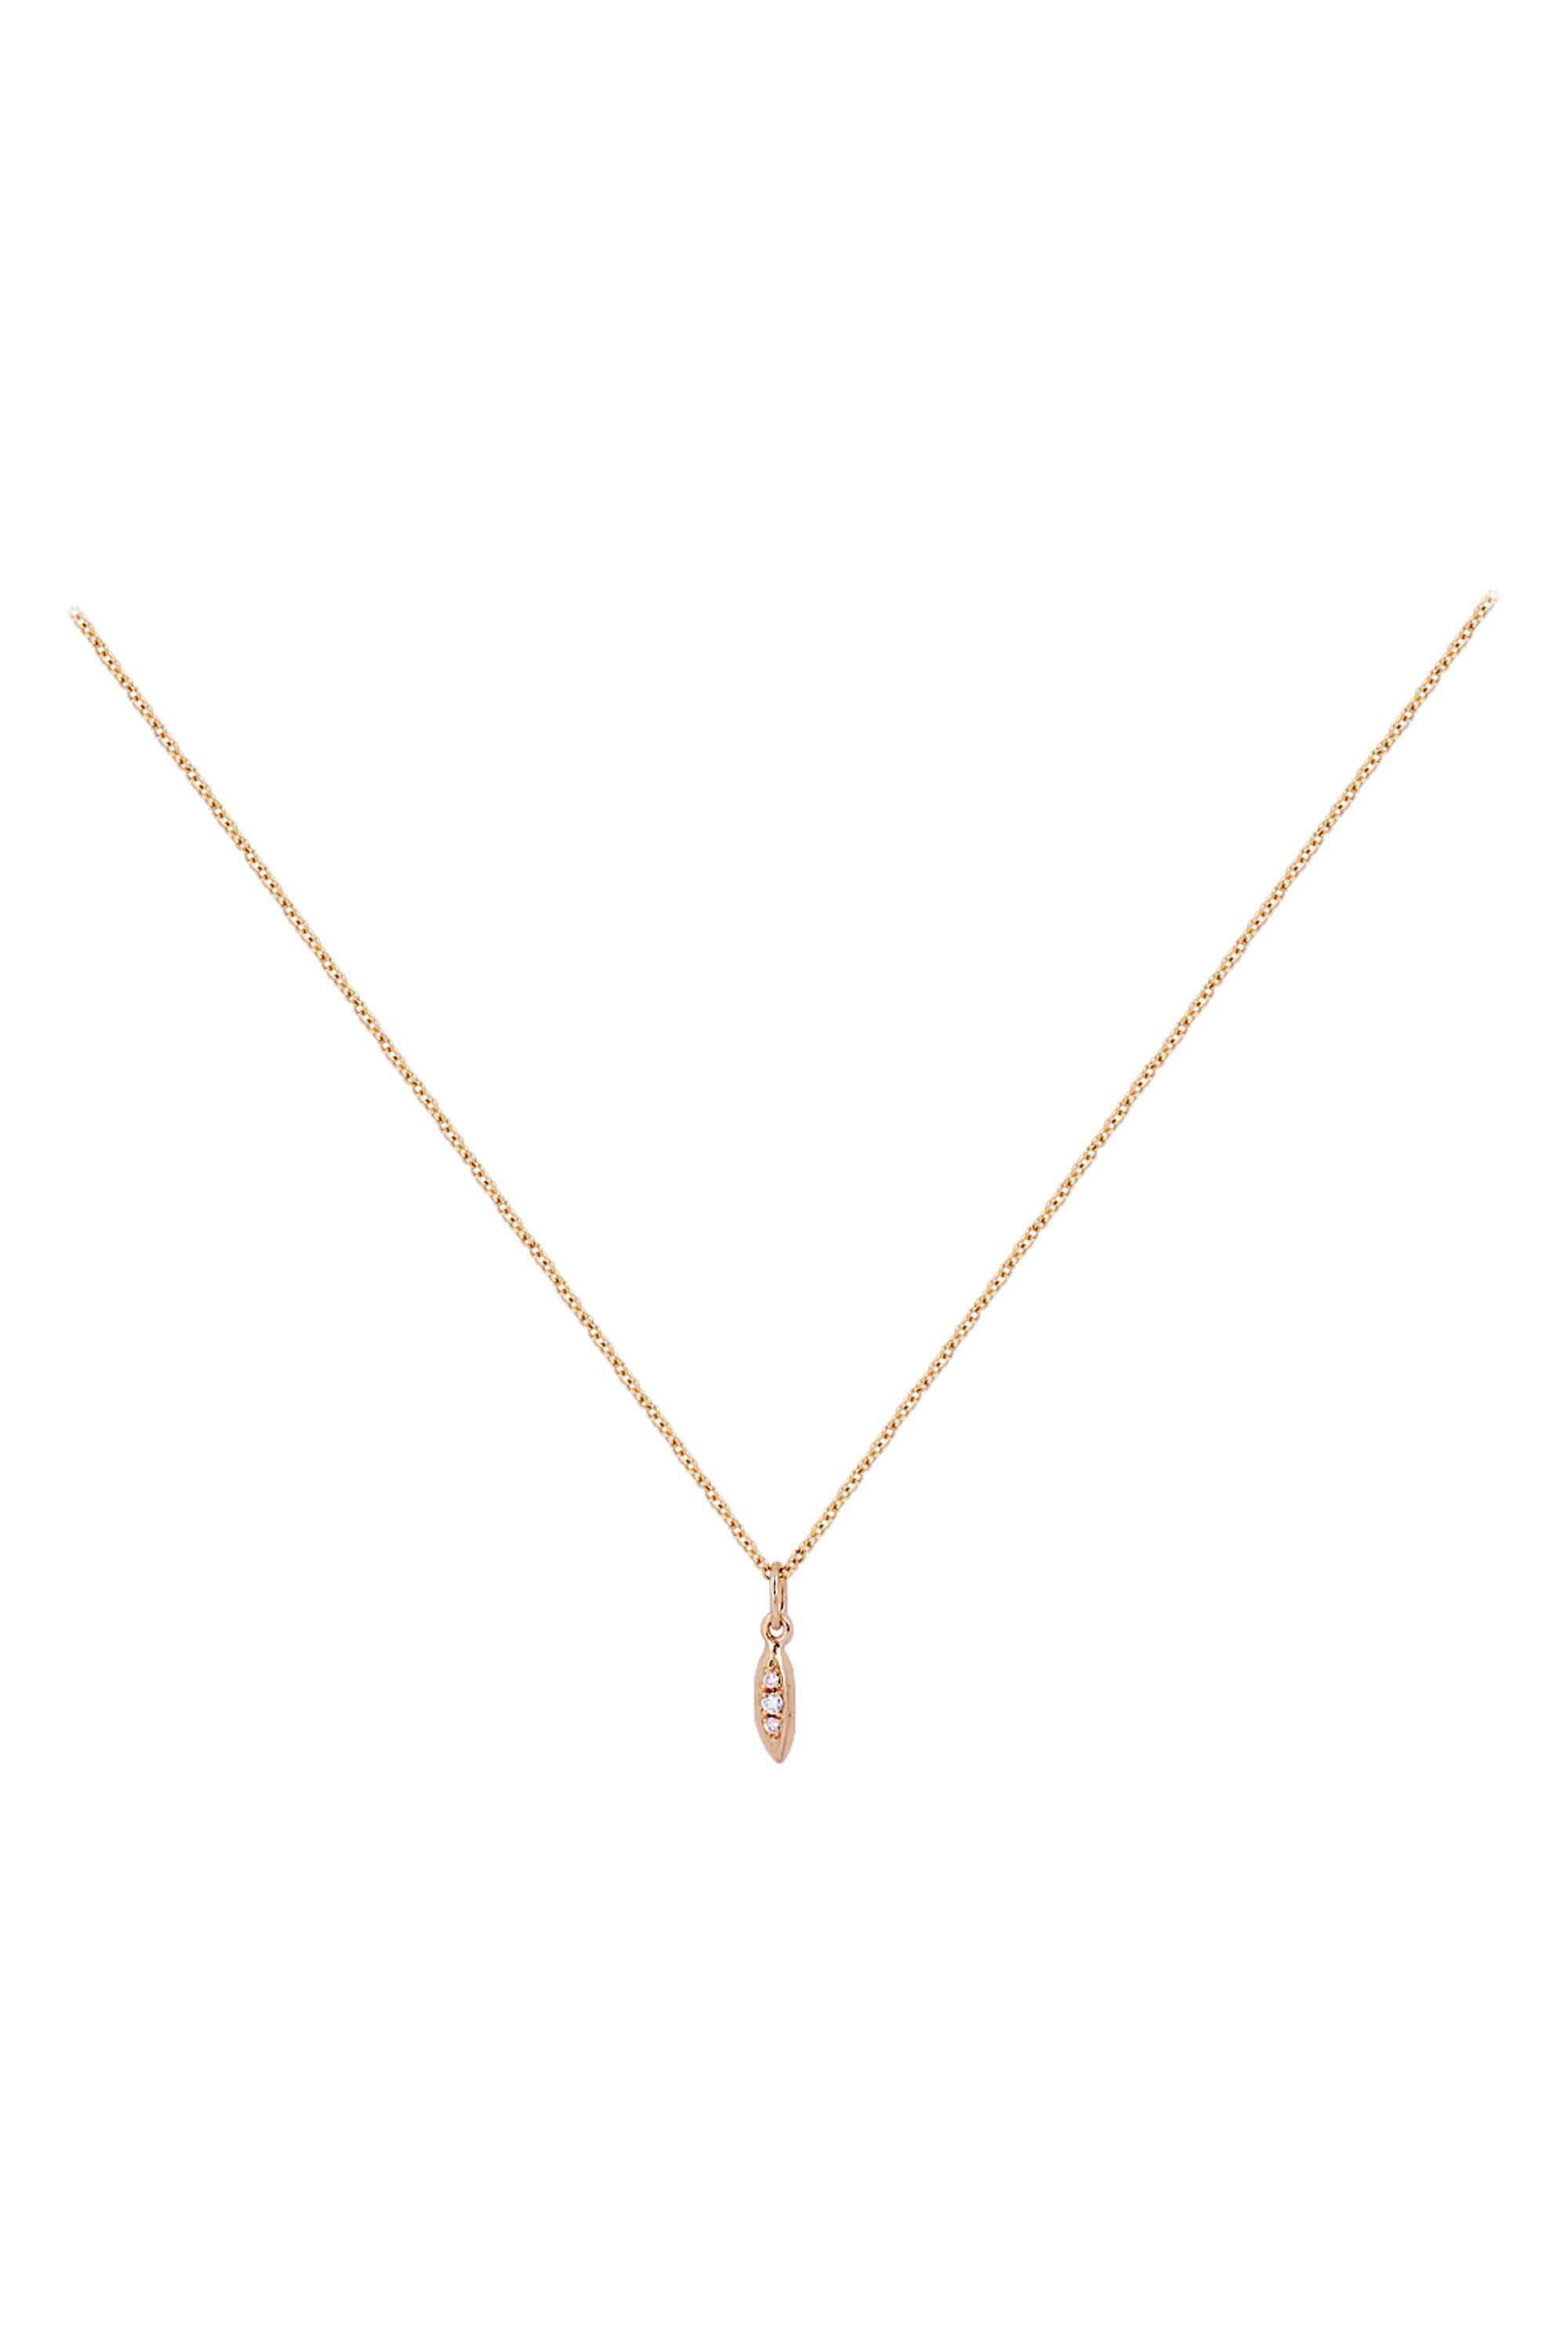 Designed and created by Gems Are Forever, Inc in Beverly Hills. This whimsical diamond necklace is inspired by a grain of rice. Here, rice is not just a food, it’s a symbol of happiness, bounty, and a key part that shaped many cultures. The necklace